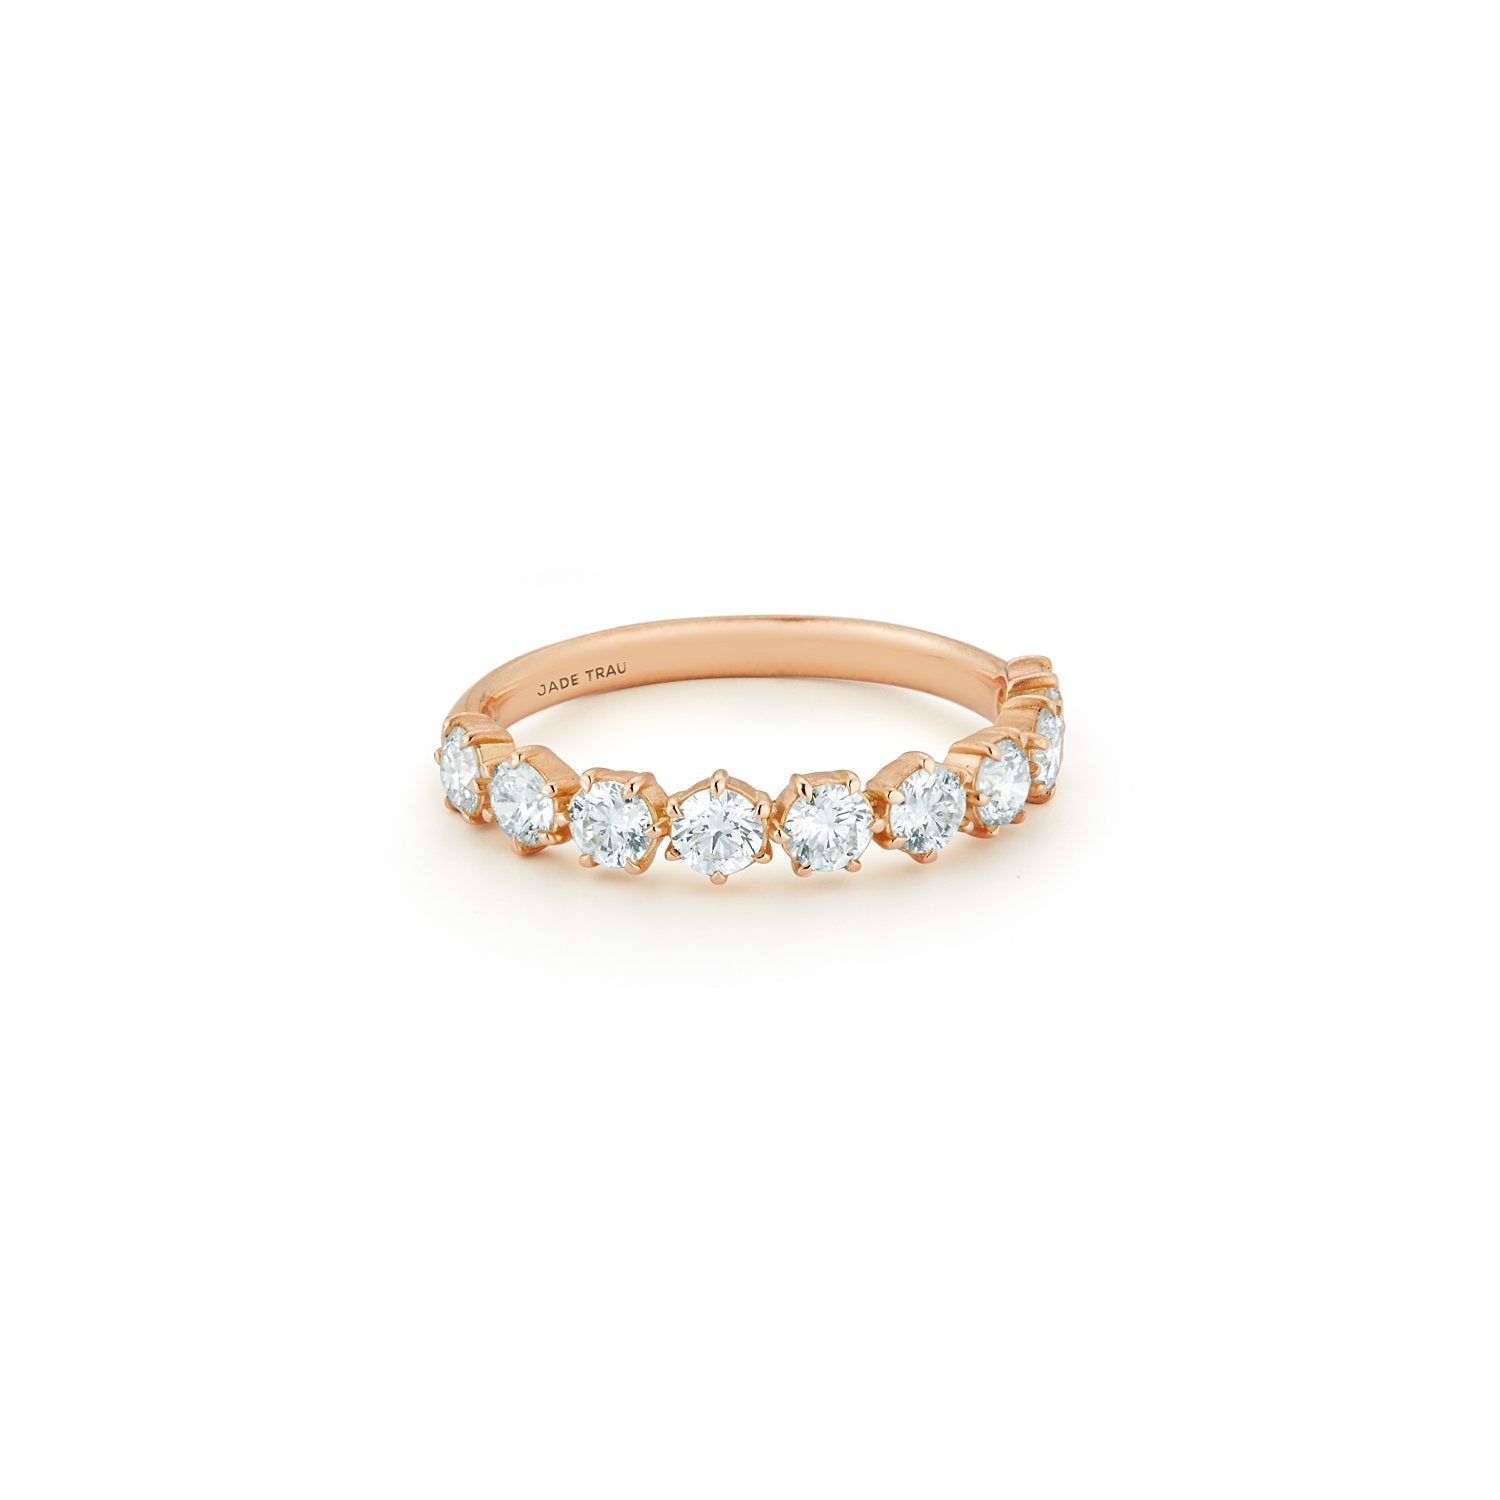 Catherine 1/2 Way Eternity No. 2 in 18K Rose Gold